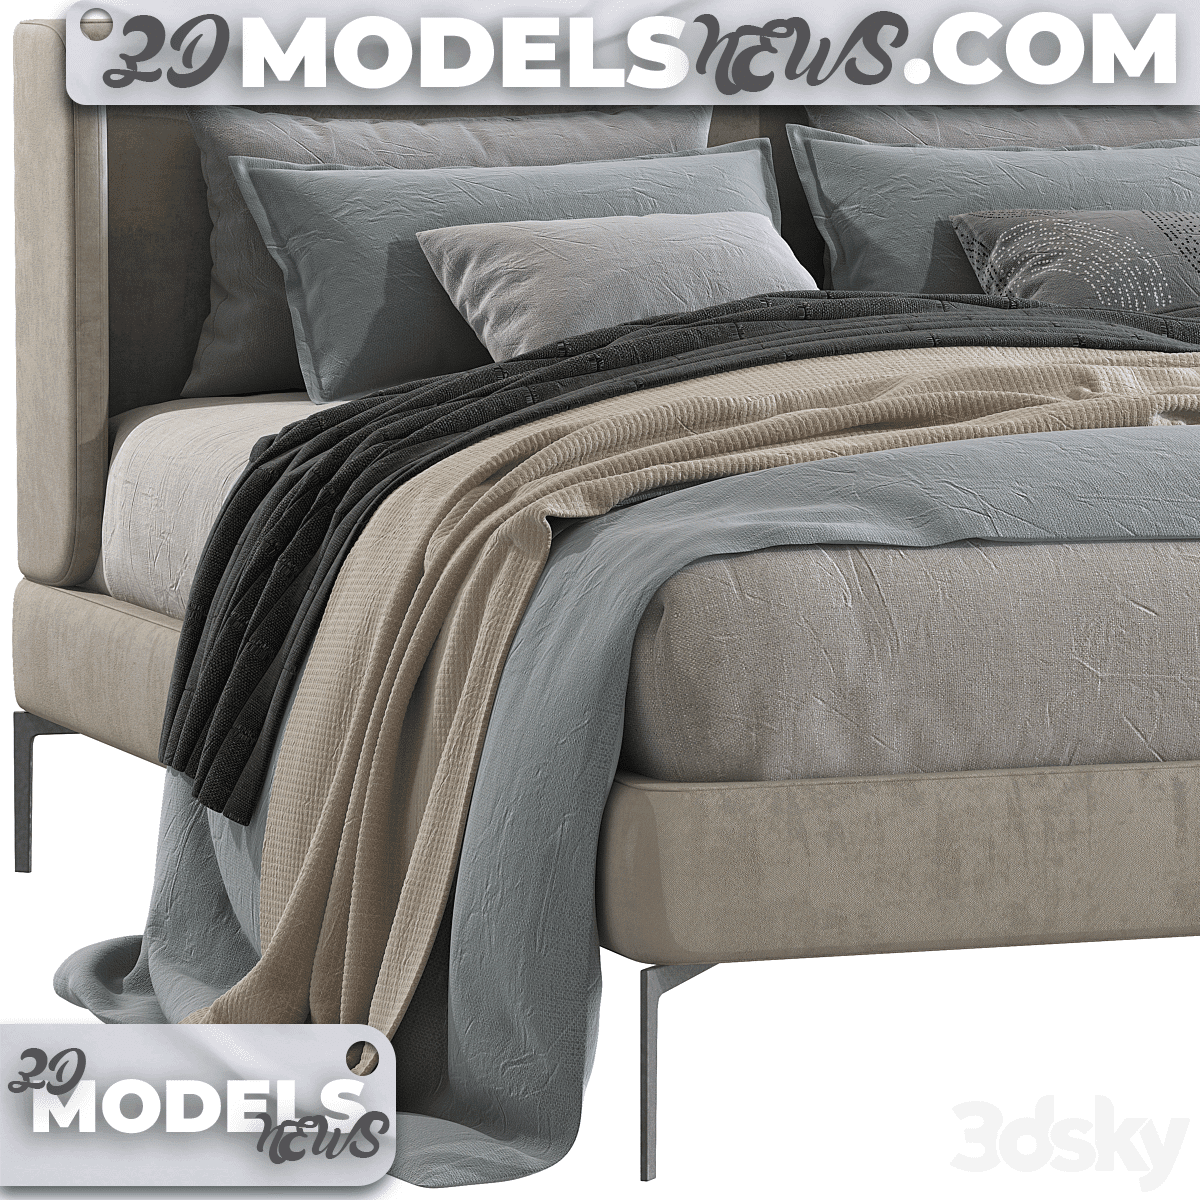 Double Bed Model 82 2